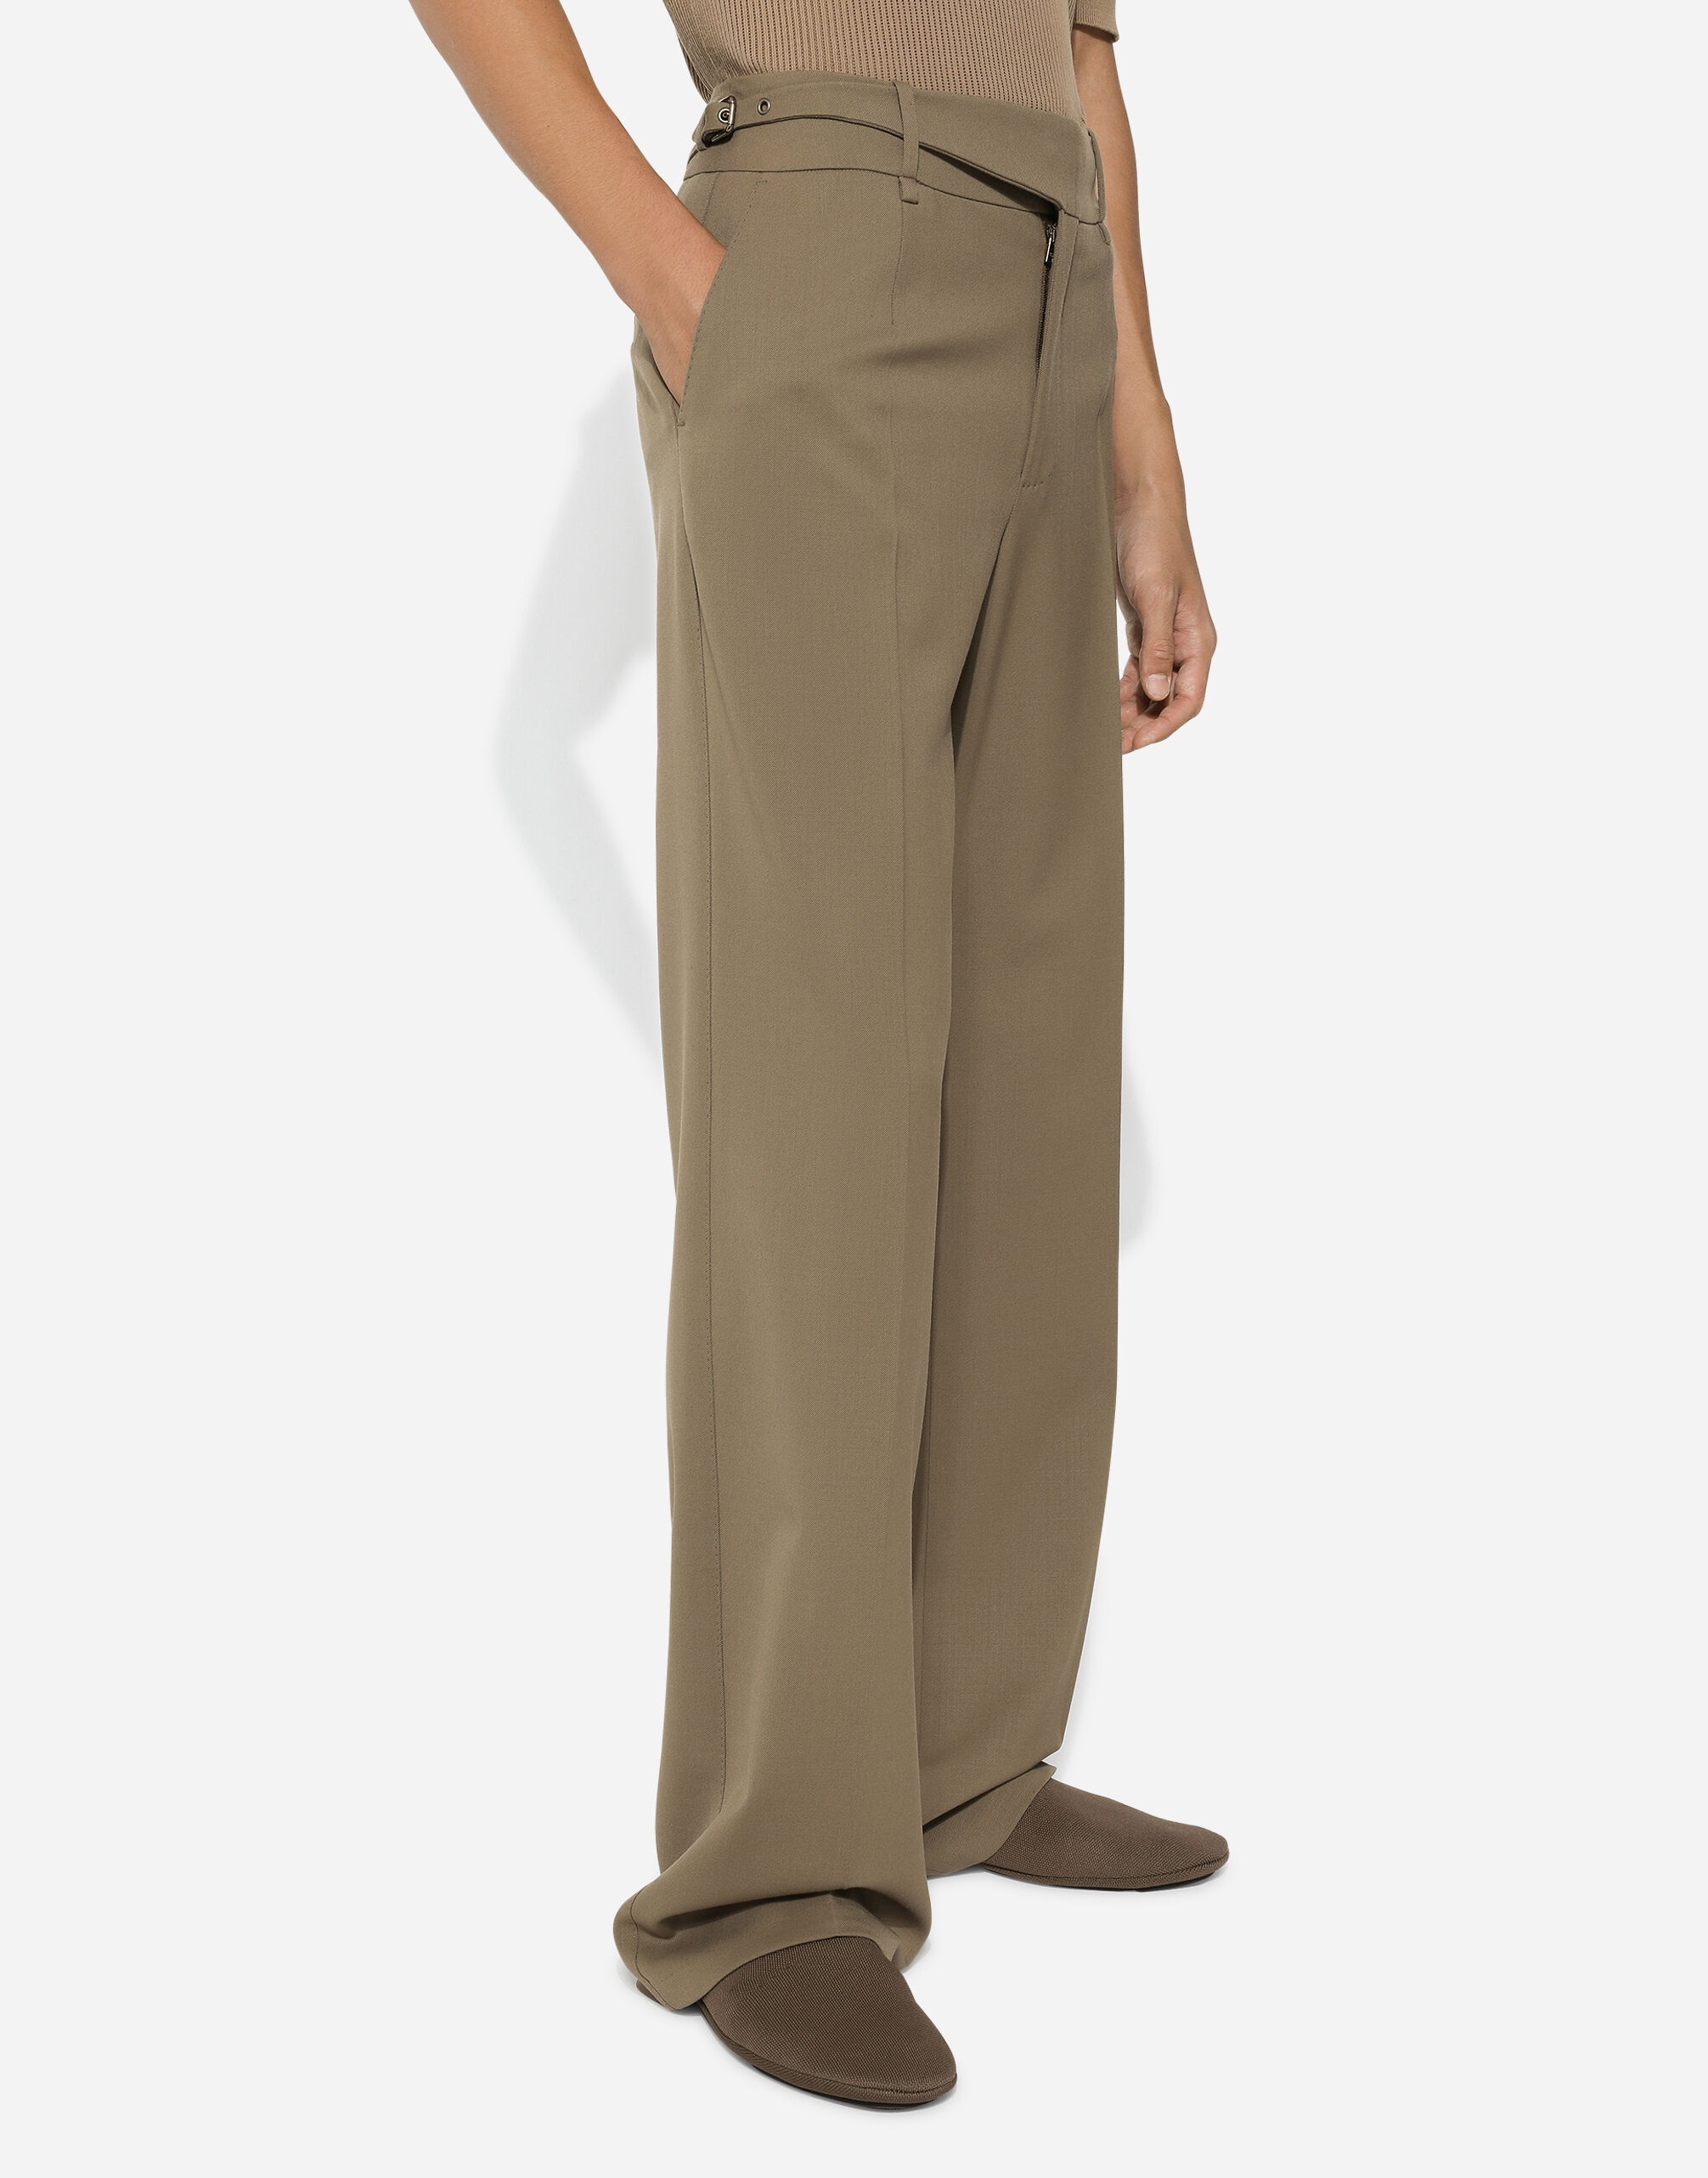 Tailored two-way stretch twill pants - 4